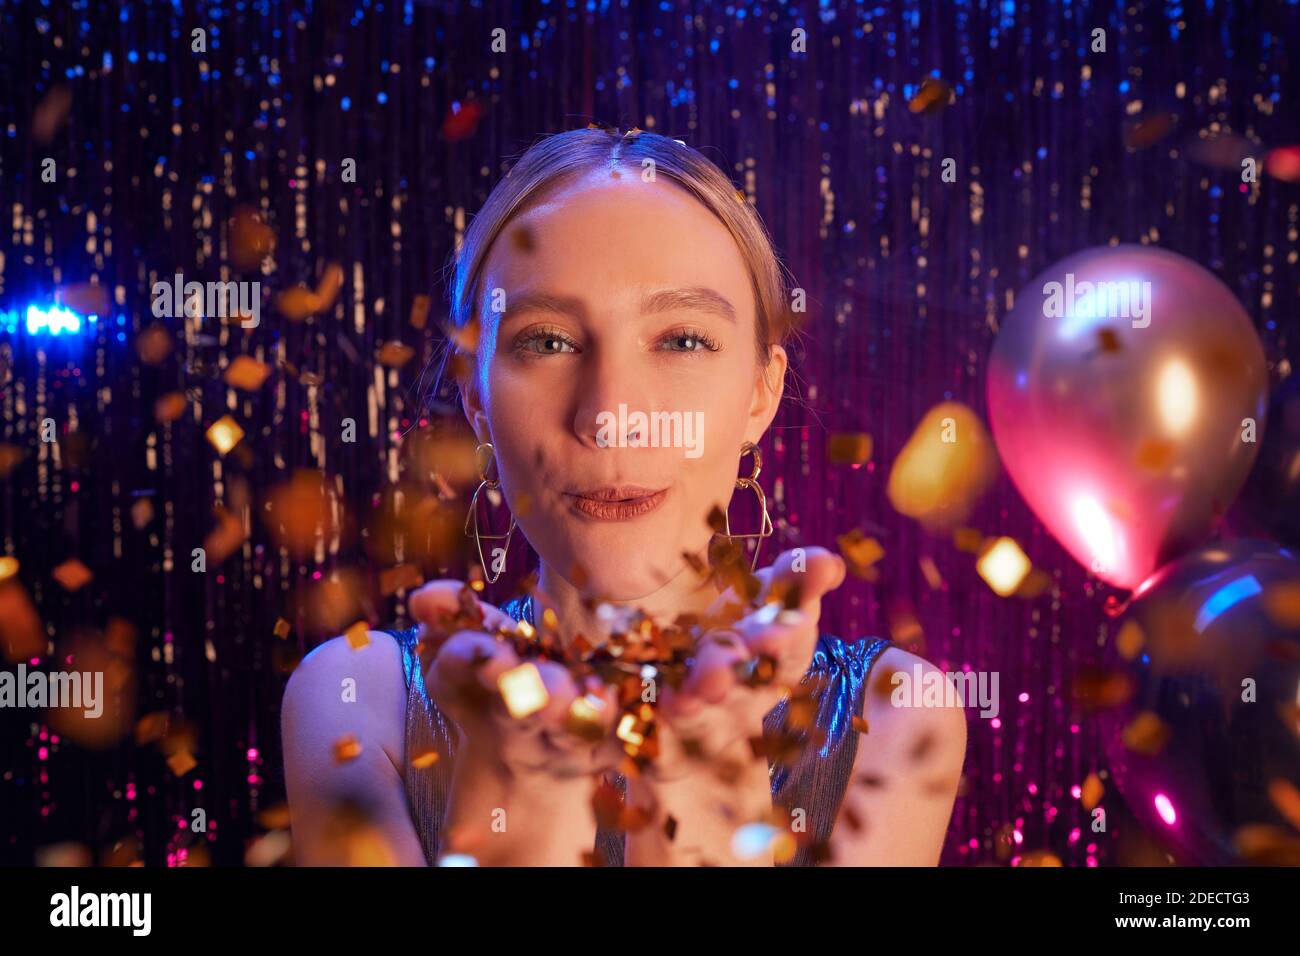 Close up portrait of beautiful blonde woman blowing glitter at camera while enjoying party in nightclub, copy space Stock Photo